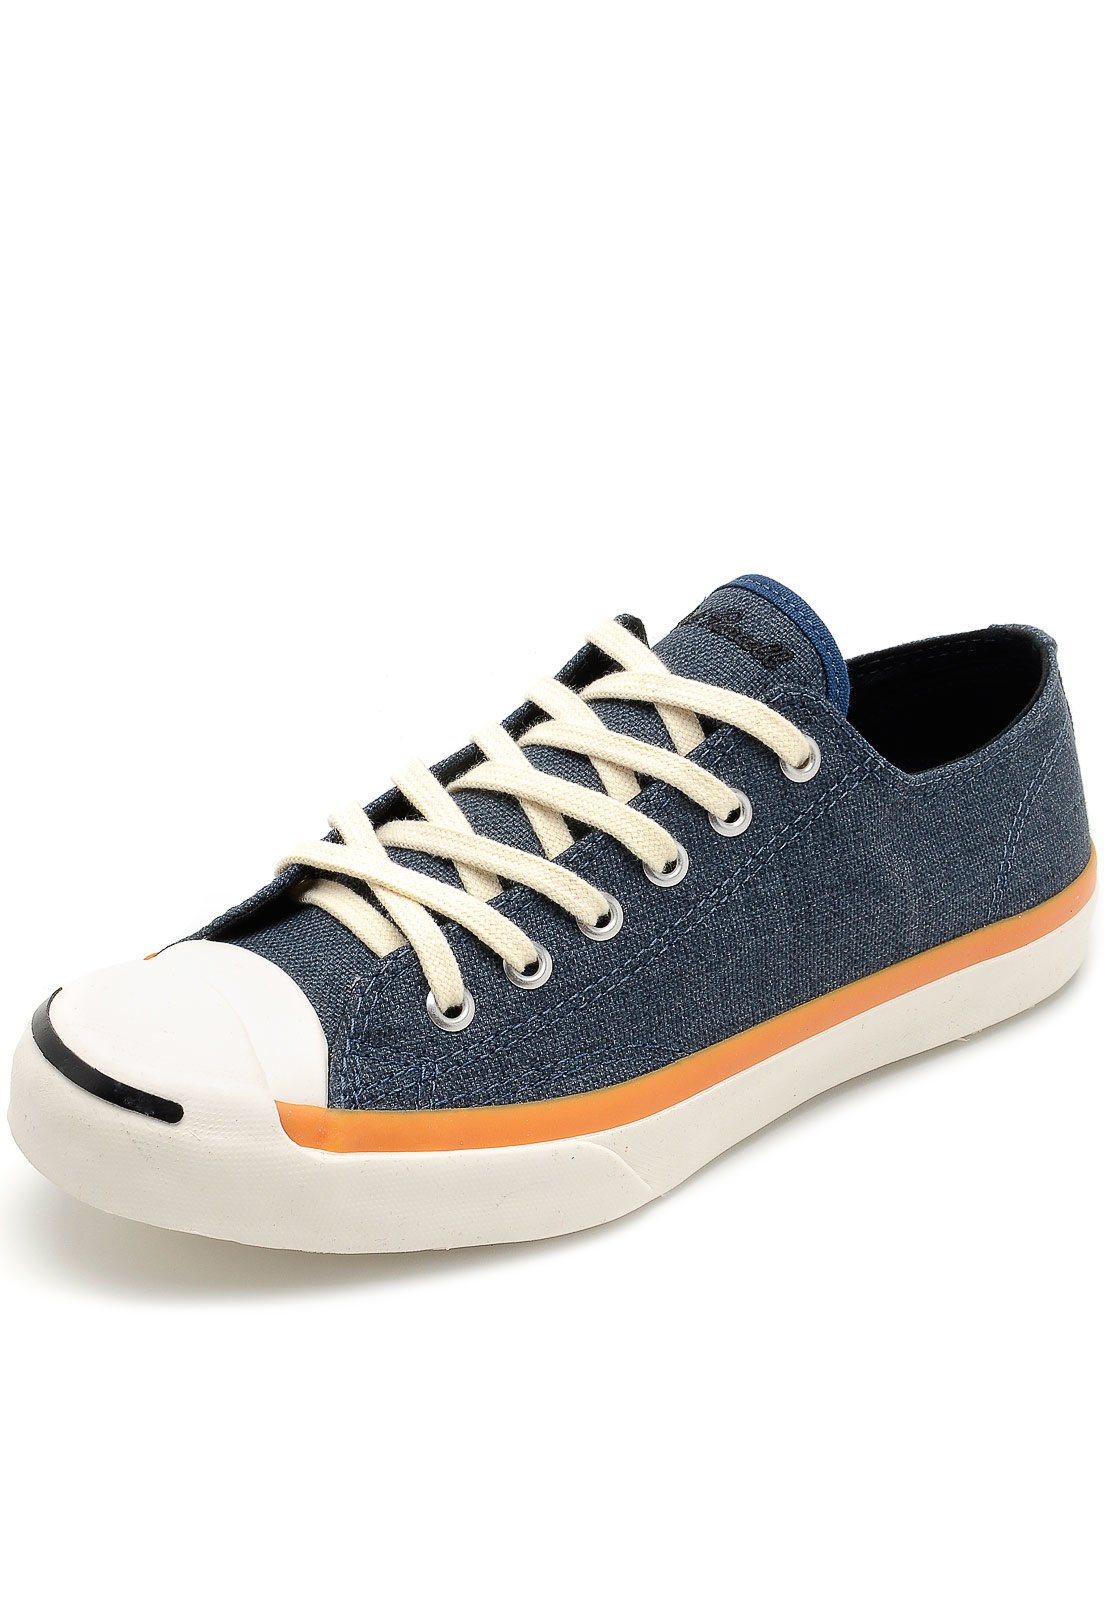 converse jack purcell azul